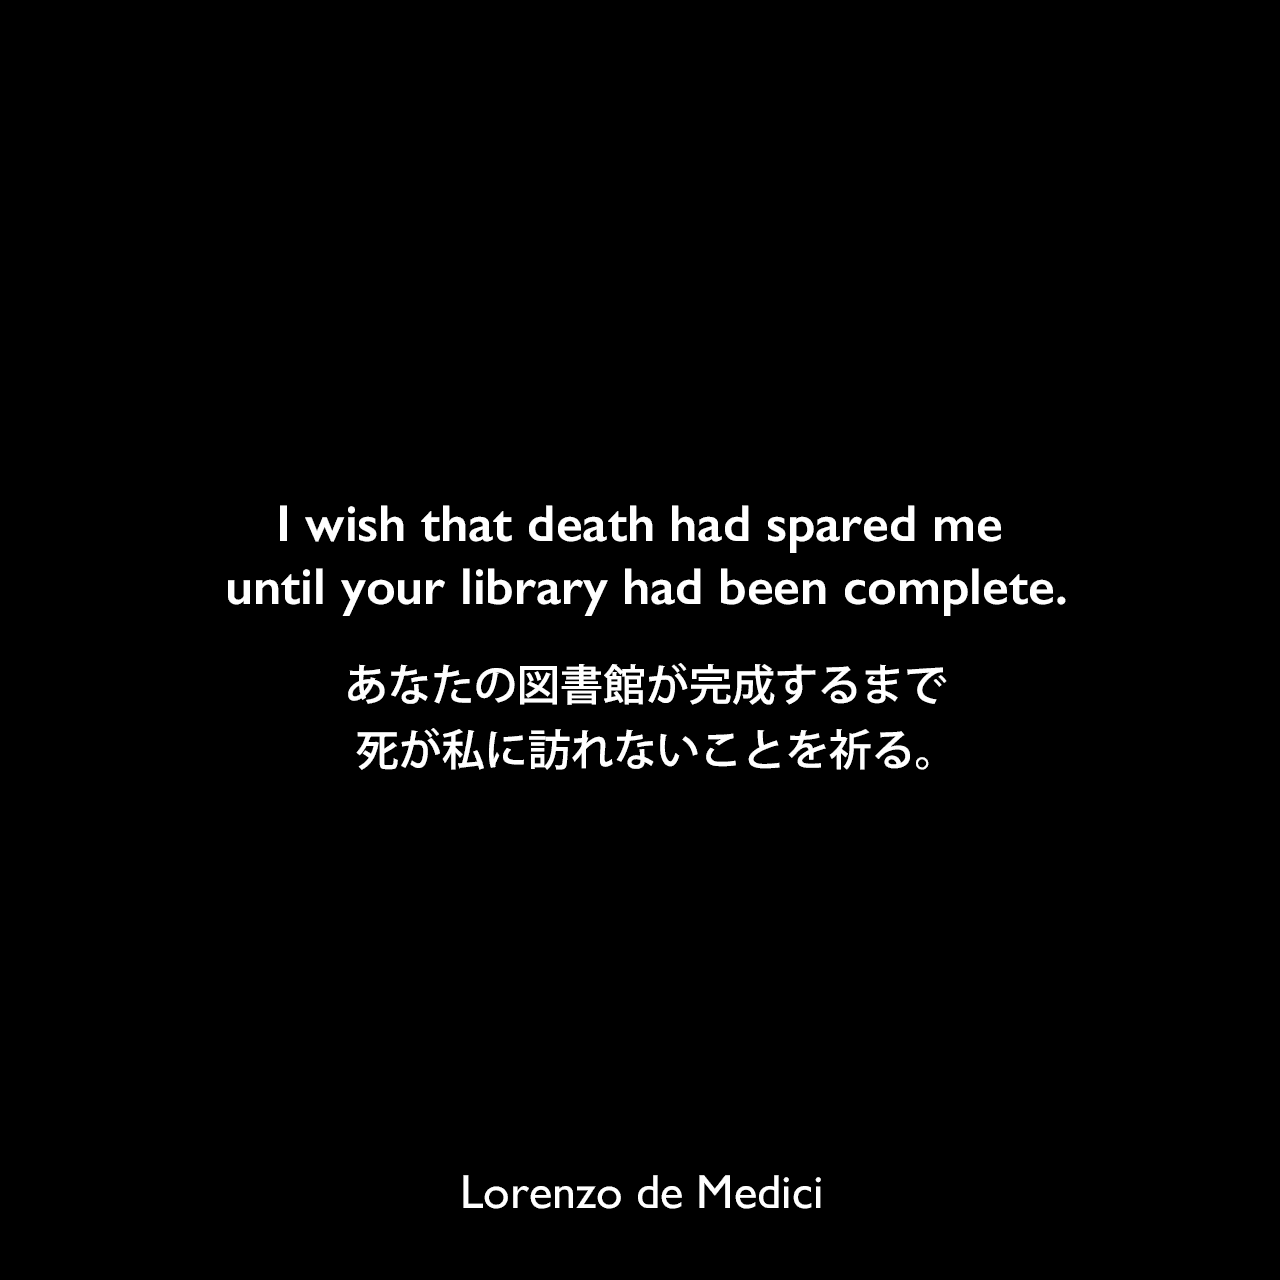 I wish that death had spared me until your library had been complete.あなたの図書館が完成するまで、死が私に訪れないことを祈る。Lorenzo de Medici